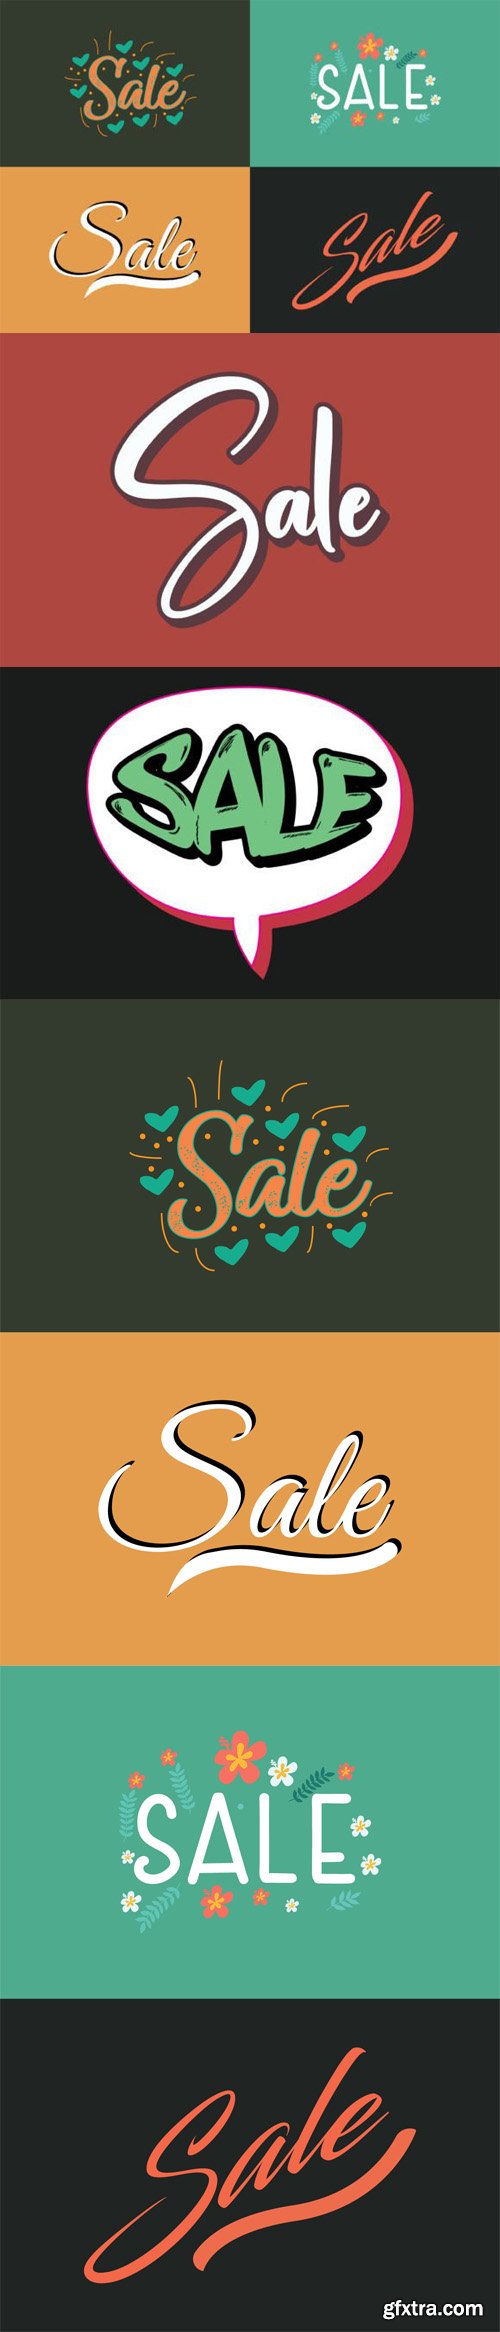 Sales Text Banners - Vector Hand Lettering Templates